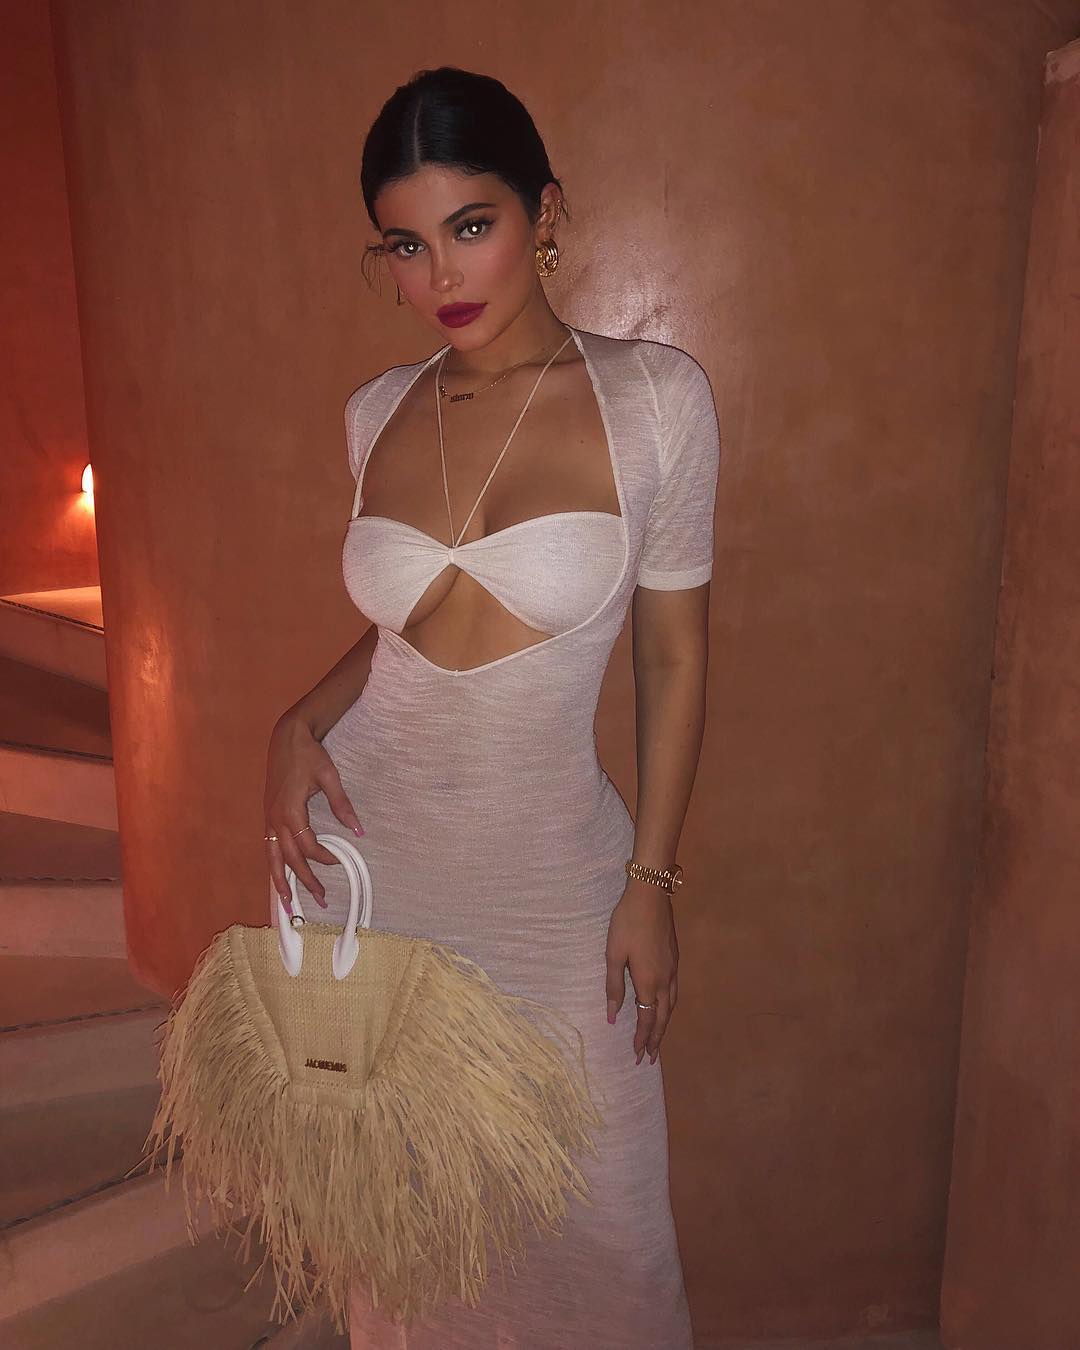 Kylie Jenner Posts Images From Her Vacation With Travis Scott Wearing A Sheer Dress